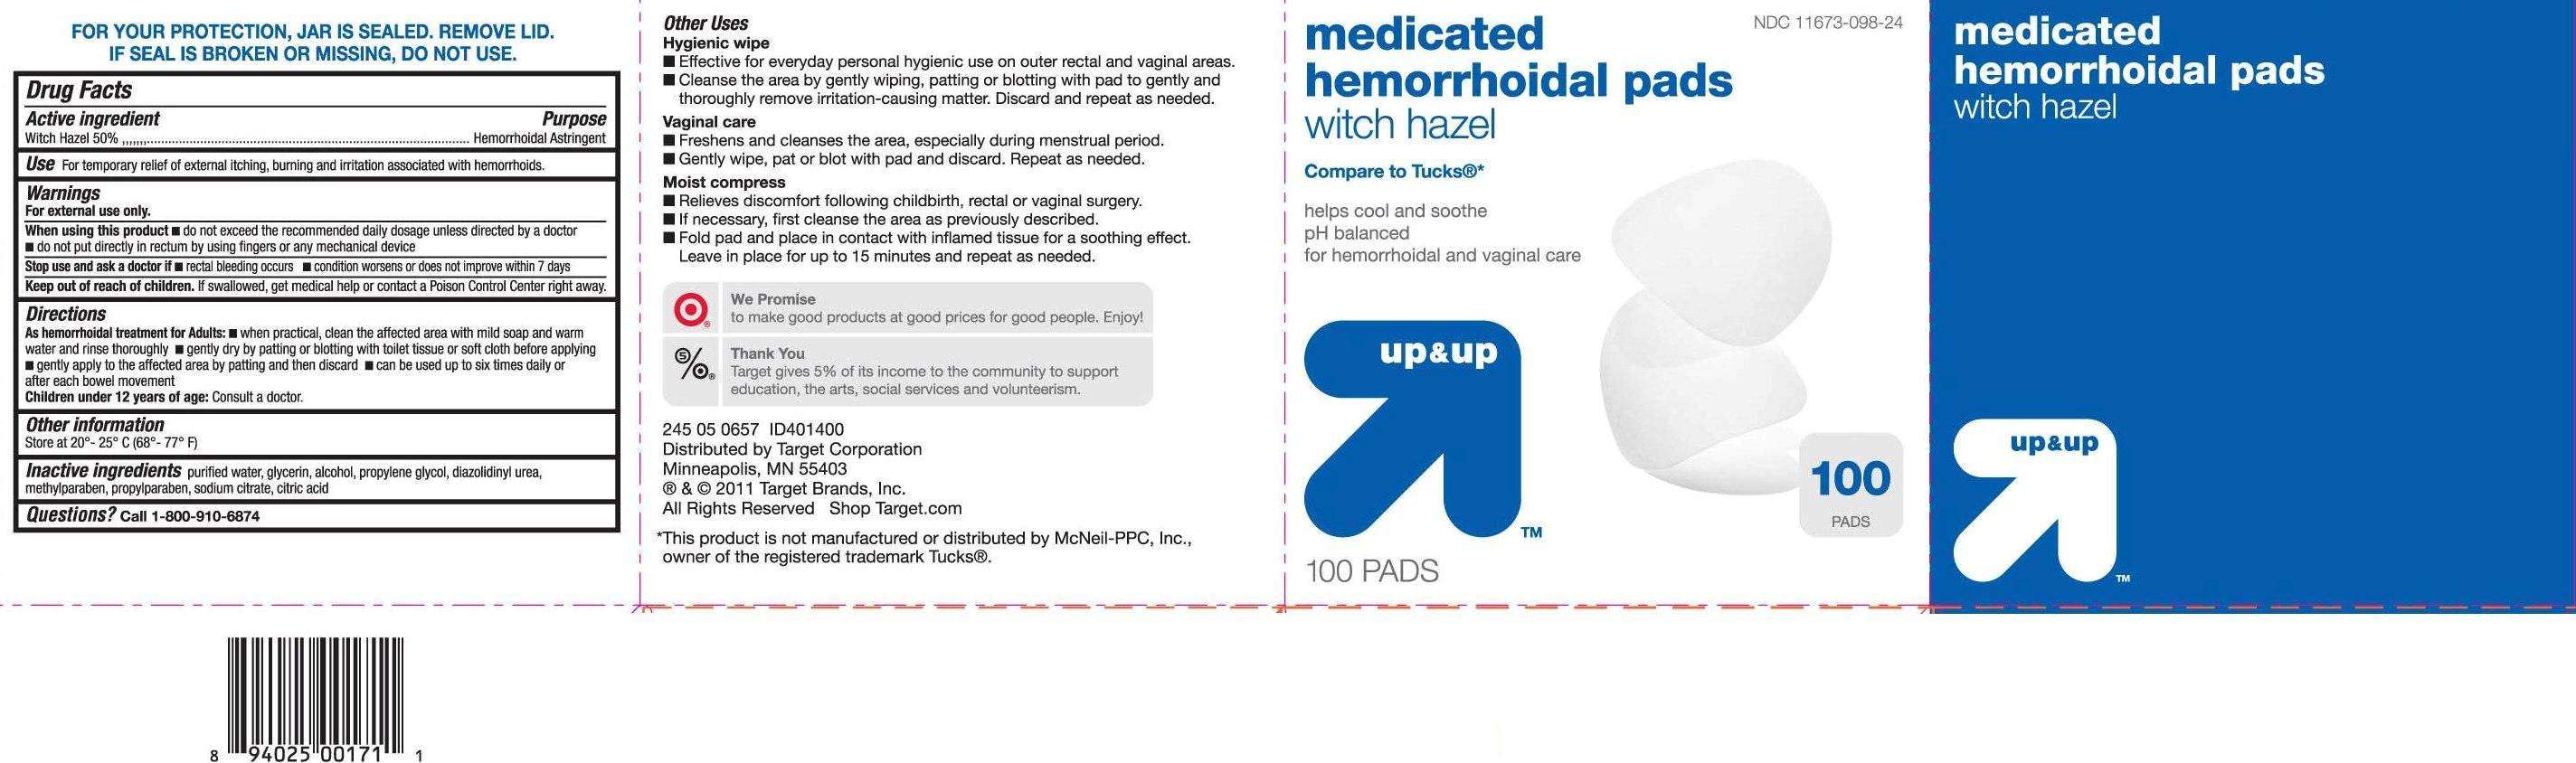 Up and Up Medicated Hemorrhoidal Pads